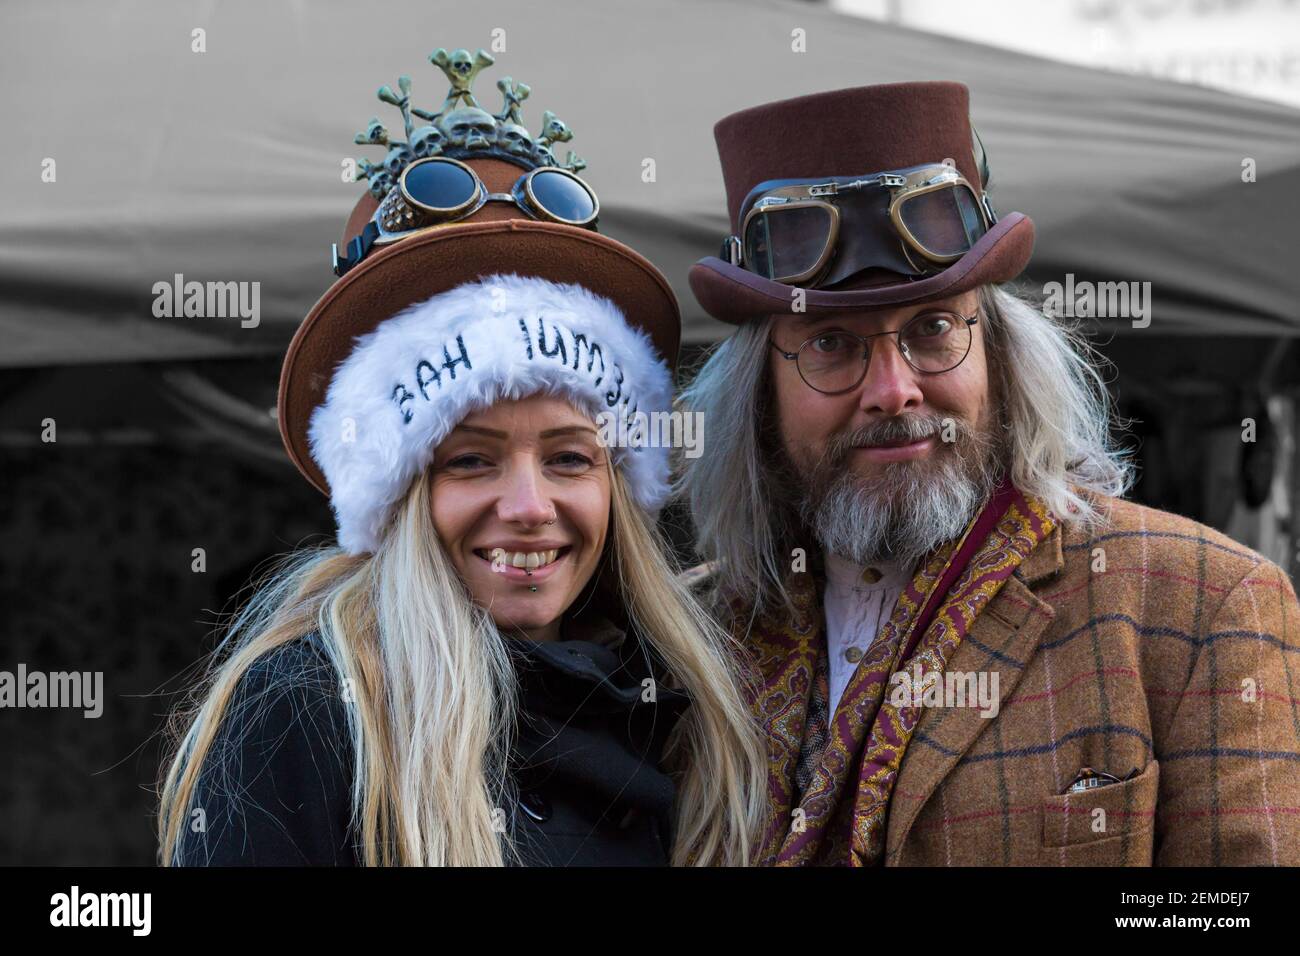 Bournemouth Metropole Street Market presents the alternative Christmas Fayre with a steampunk inspired Christmas market at Bournemouth, Dorset UK Stock Photo